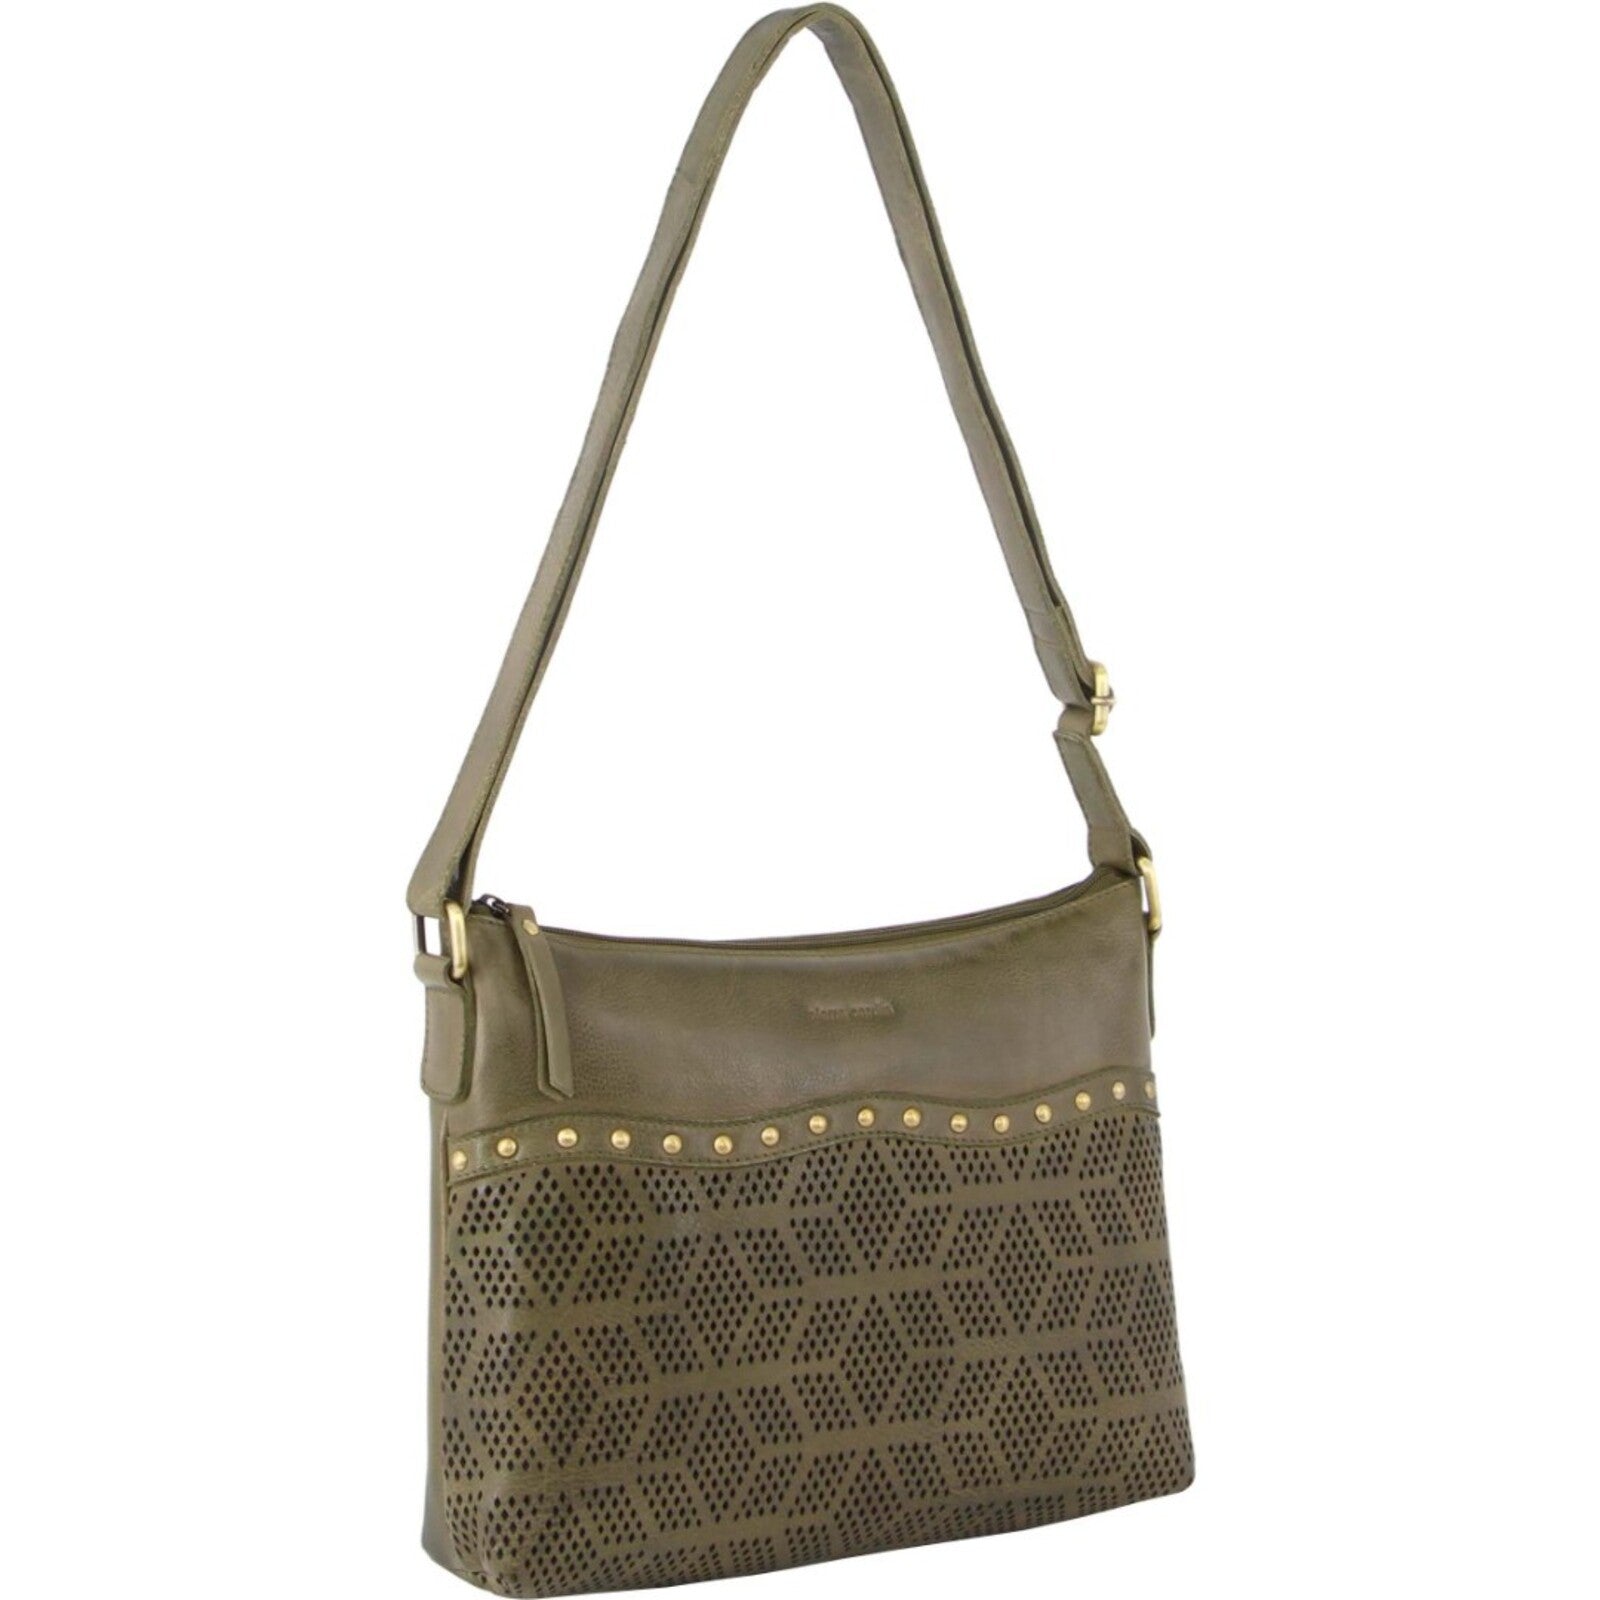 Womens Leather Perforated Cross Body Bag w/ Stud Detailing Travel - Olive